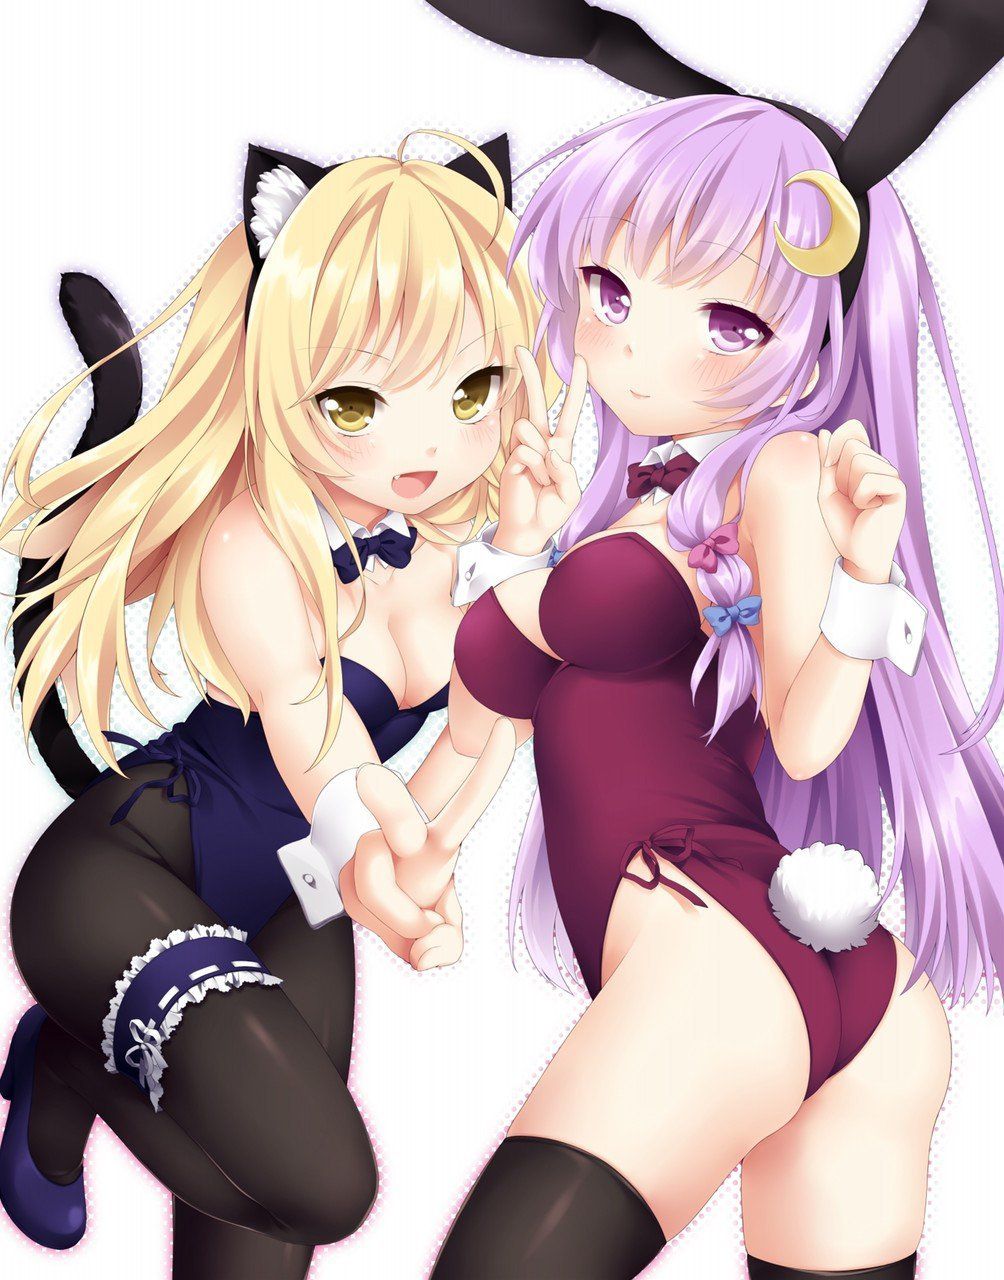 The image that the doh of the bunny girl is erotic 7